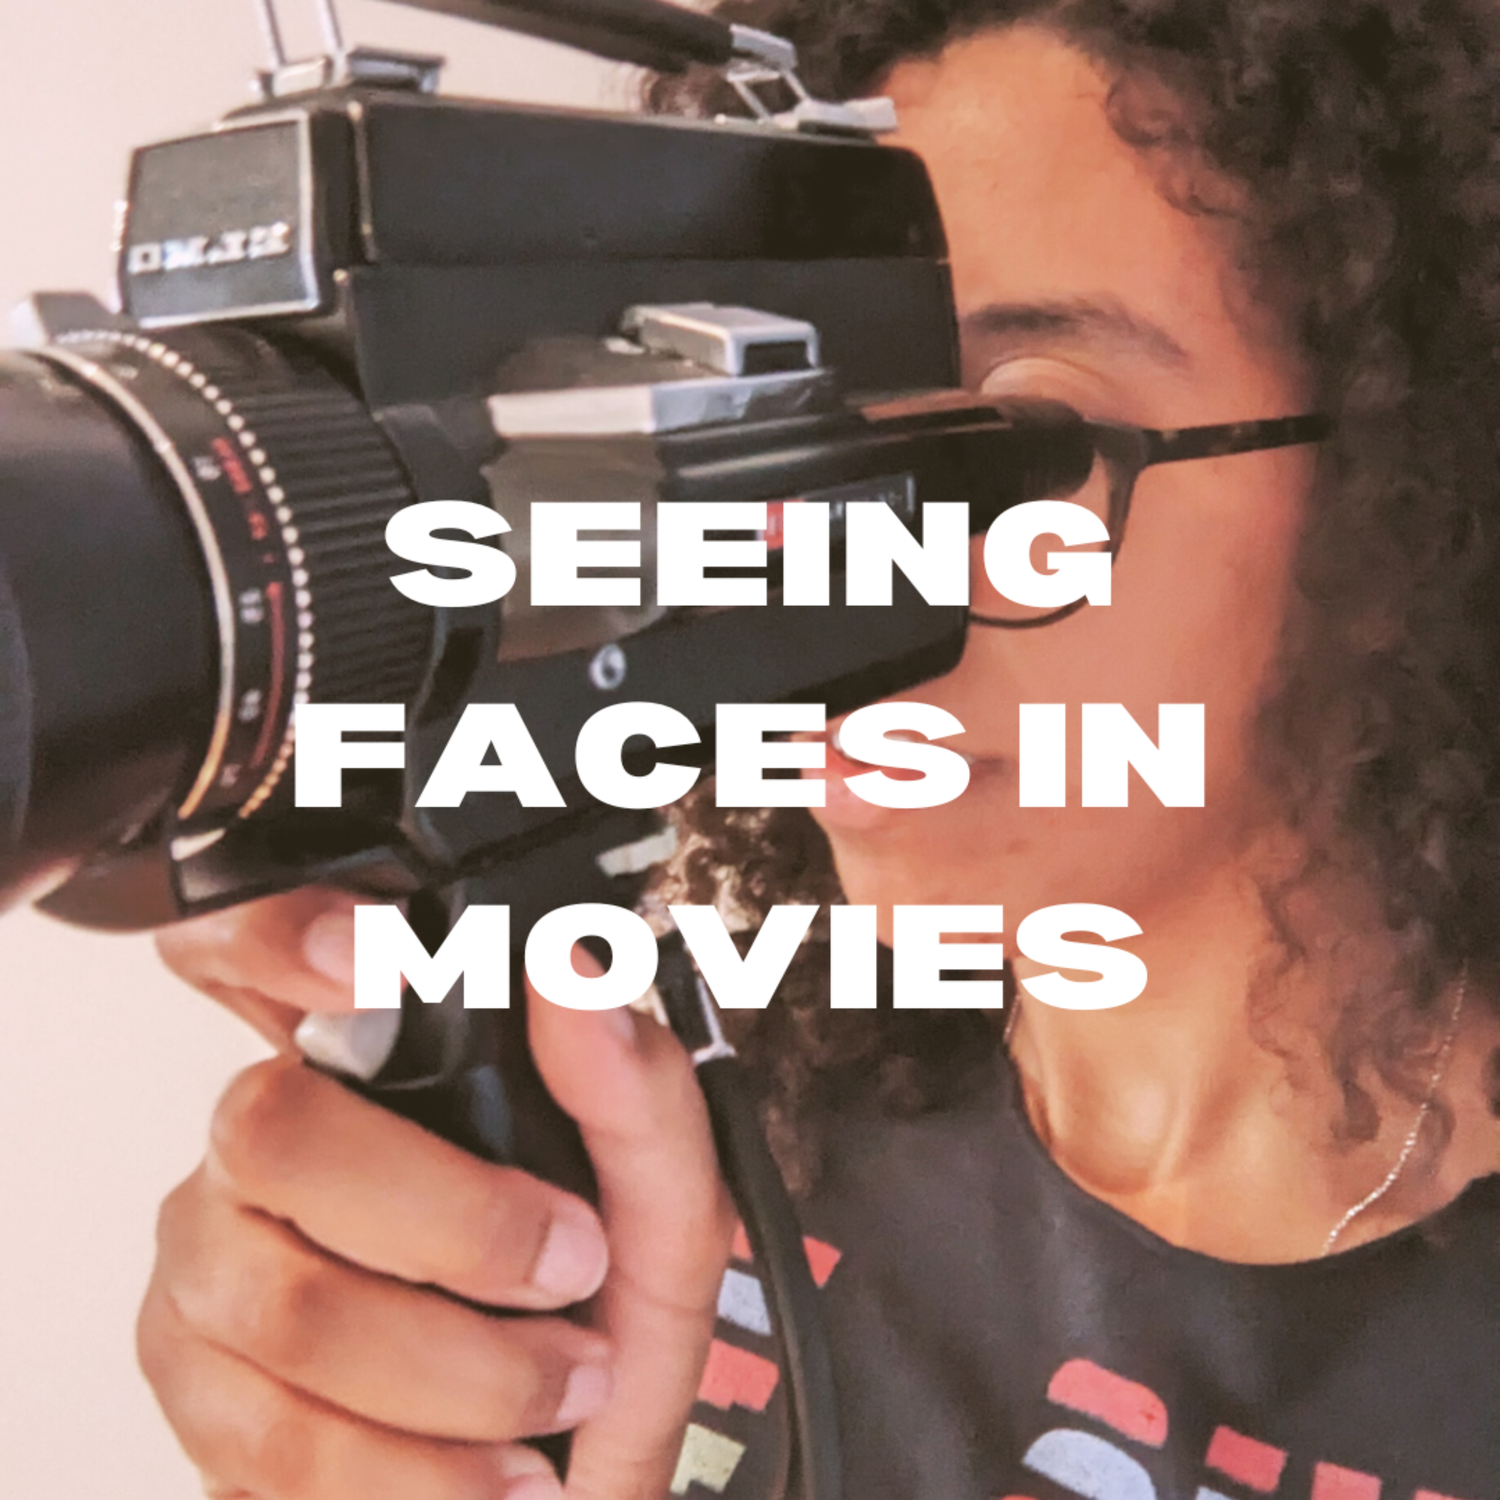 SEEING FACES IN MOVIES